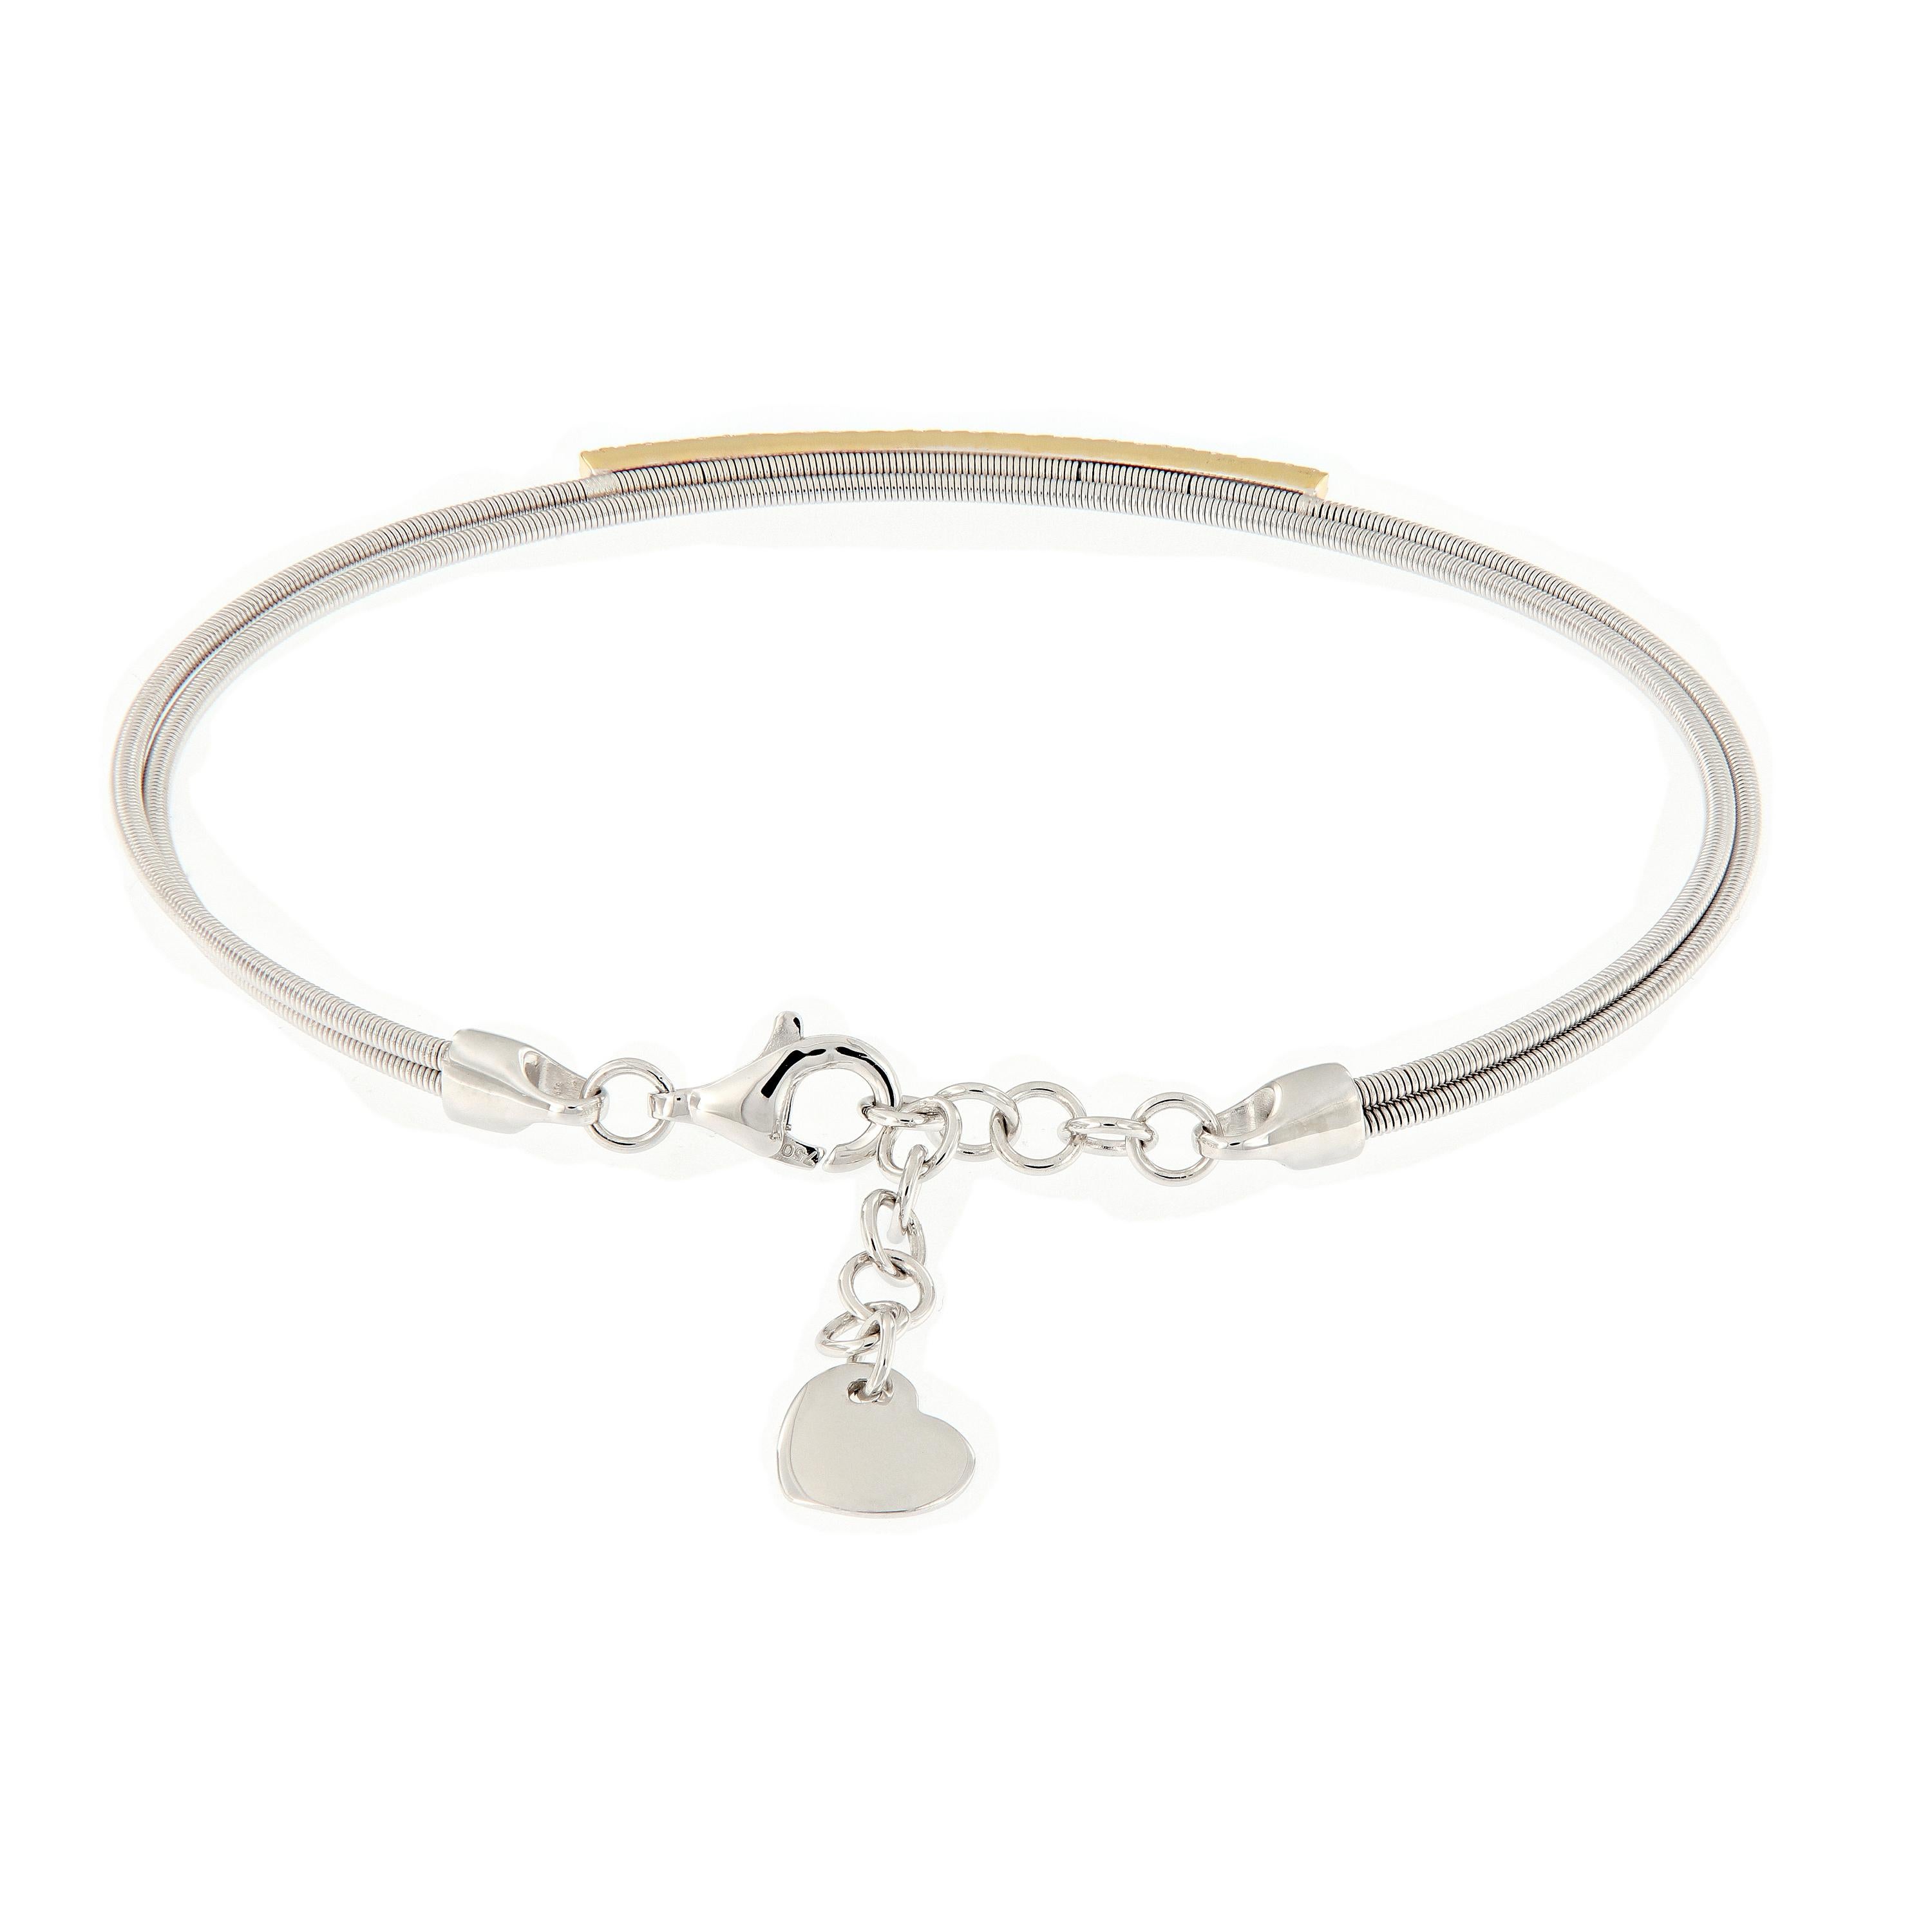 Wrap her wrist in the sparkle and comfort. This double wire bracelet is crafted in 18k white gold accented with a 18k yellow bar of diamonds. Bracelet secures with a safety chain clasp detailed with a heart dangle. Weighs 5.5 grams. Measures 2.25